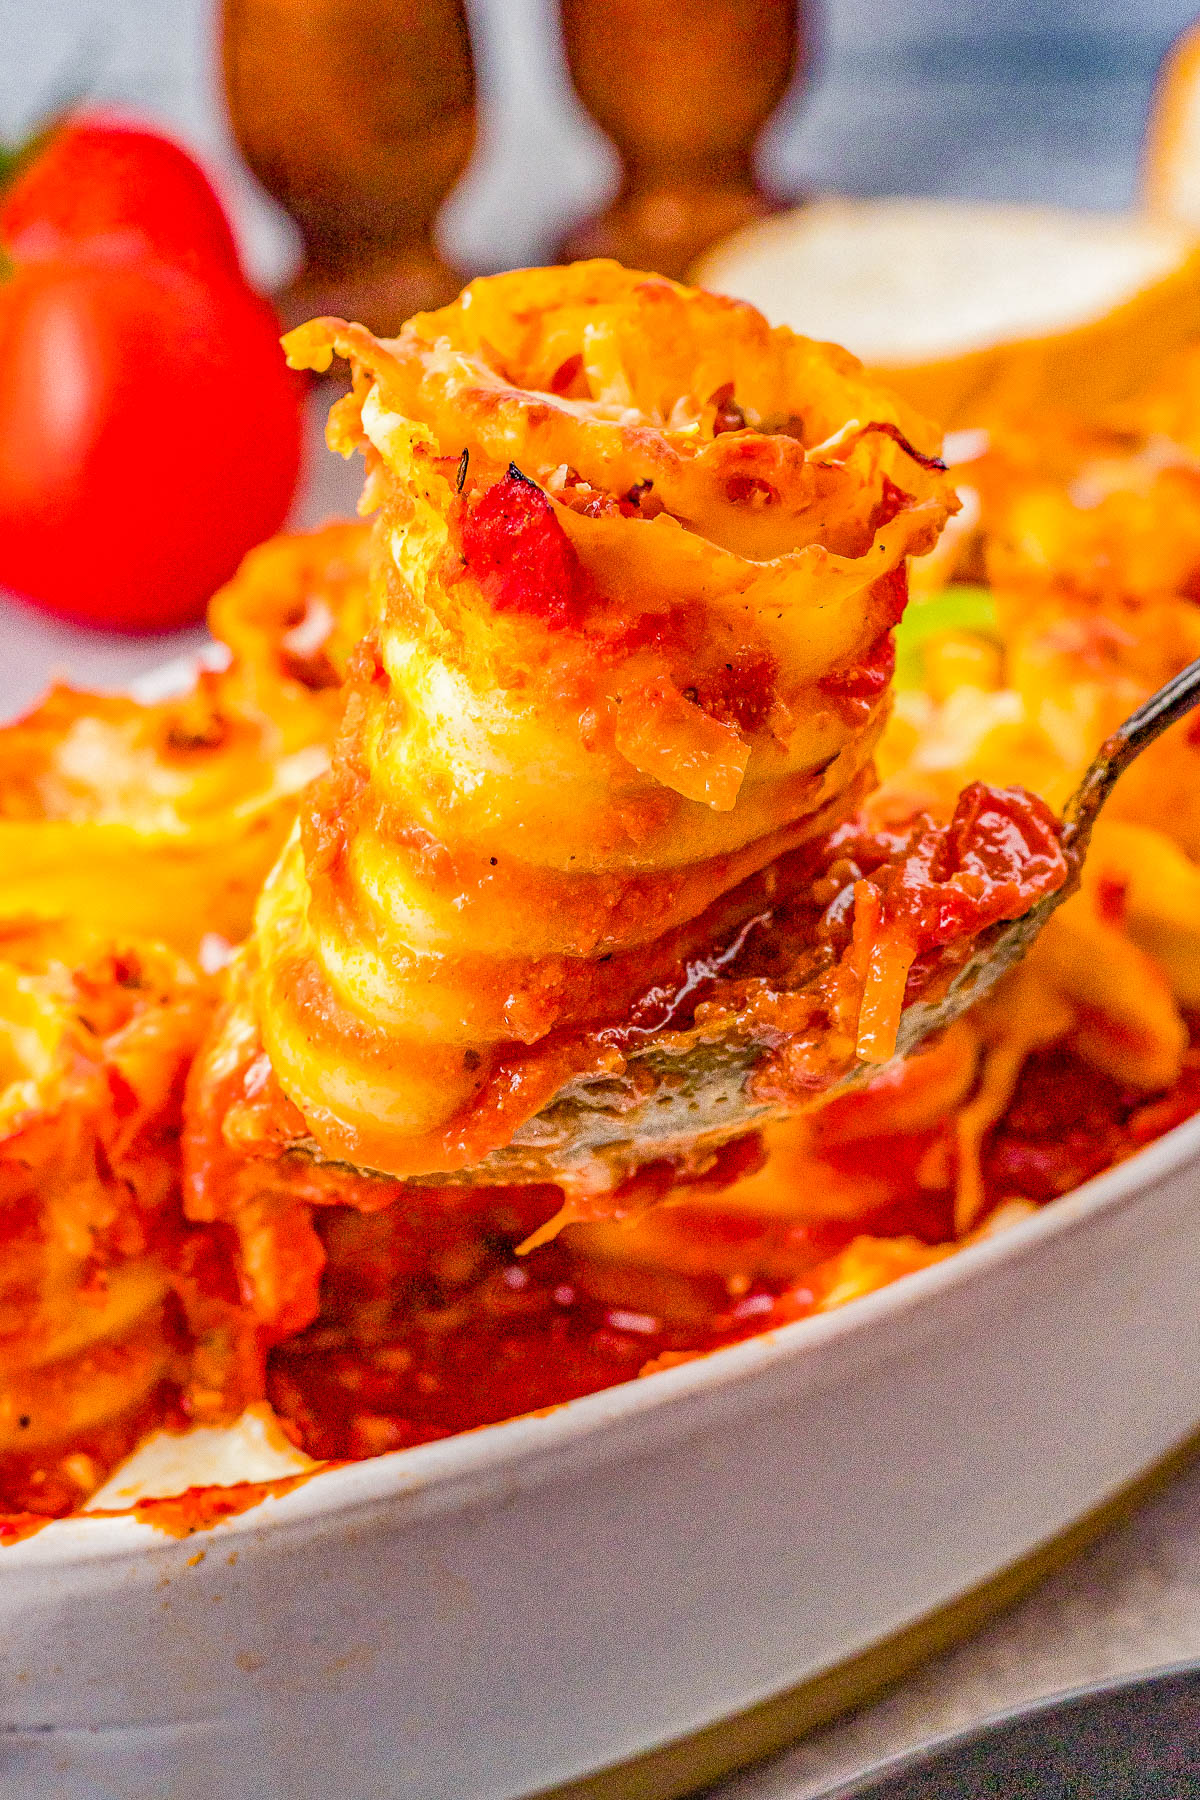 Lasagna Pinwheels – Rolled up lasagna that’s filled with juicy Italian sausage and a rich and creamy bechamel sauce before being baked in tomato sauce and more cheese! Comfort food at its finest that the whole family will LOVE! Shortcuts provided if you want to use store bought sauces rather than making your sauces to save time.